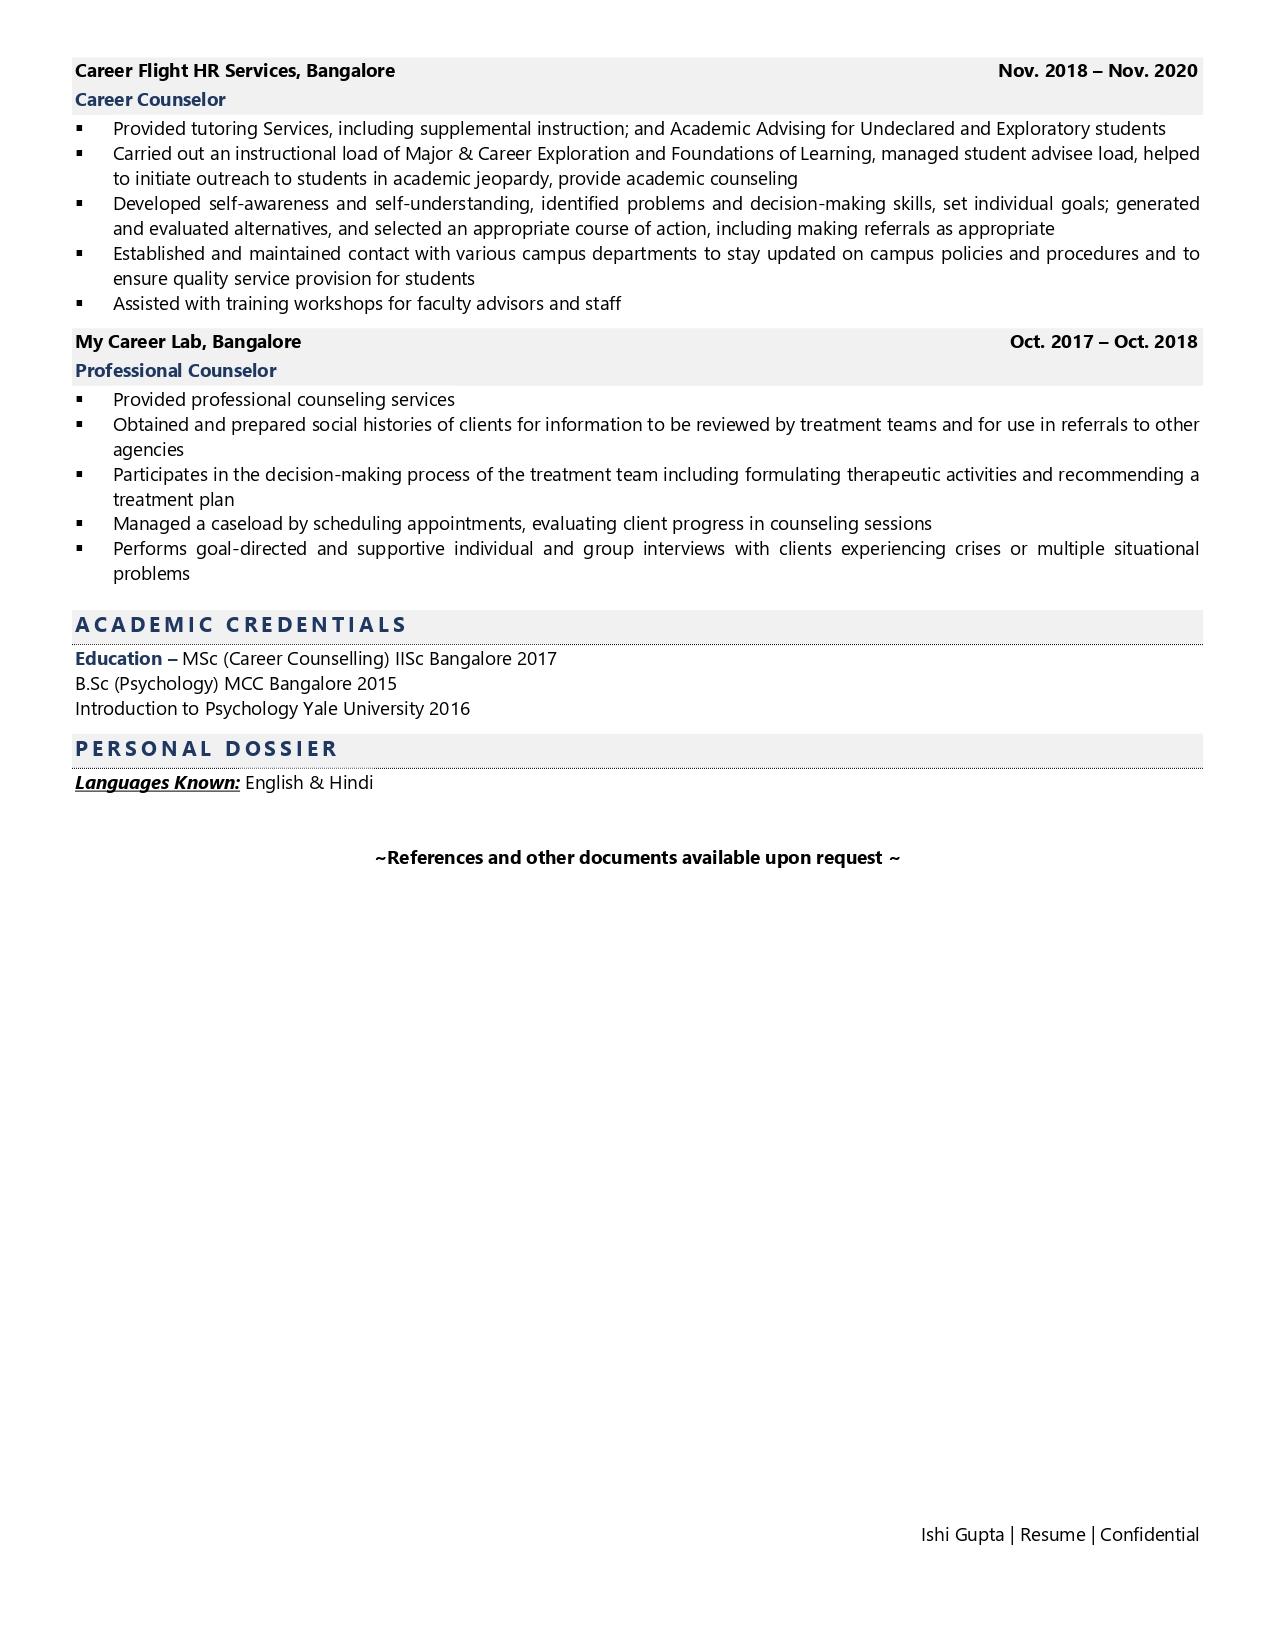 Career Counselor and Advisor - Resume Example & Template